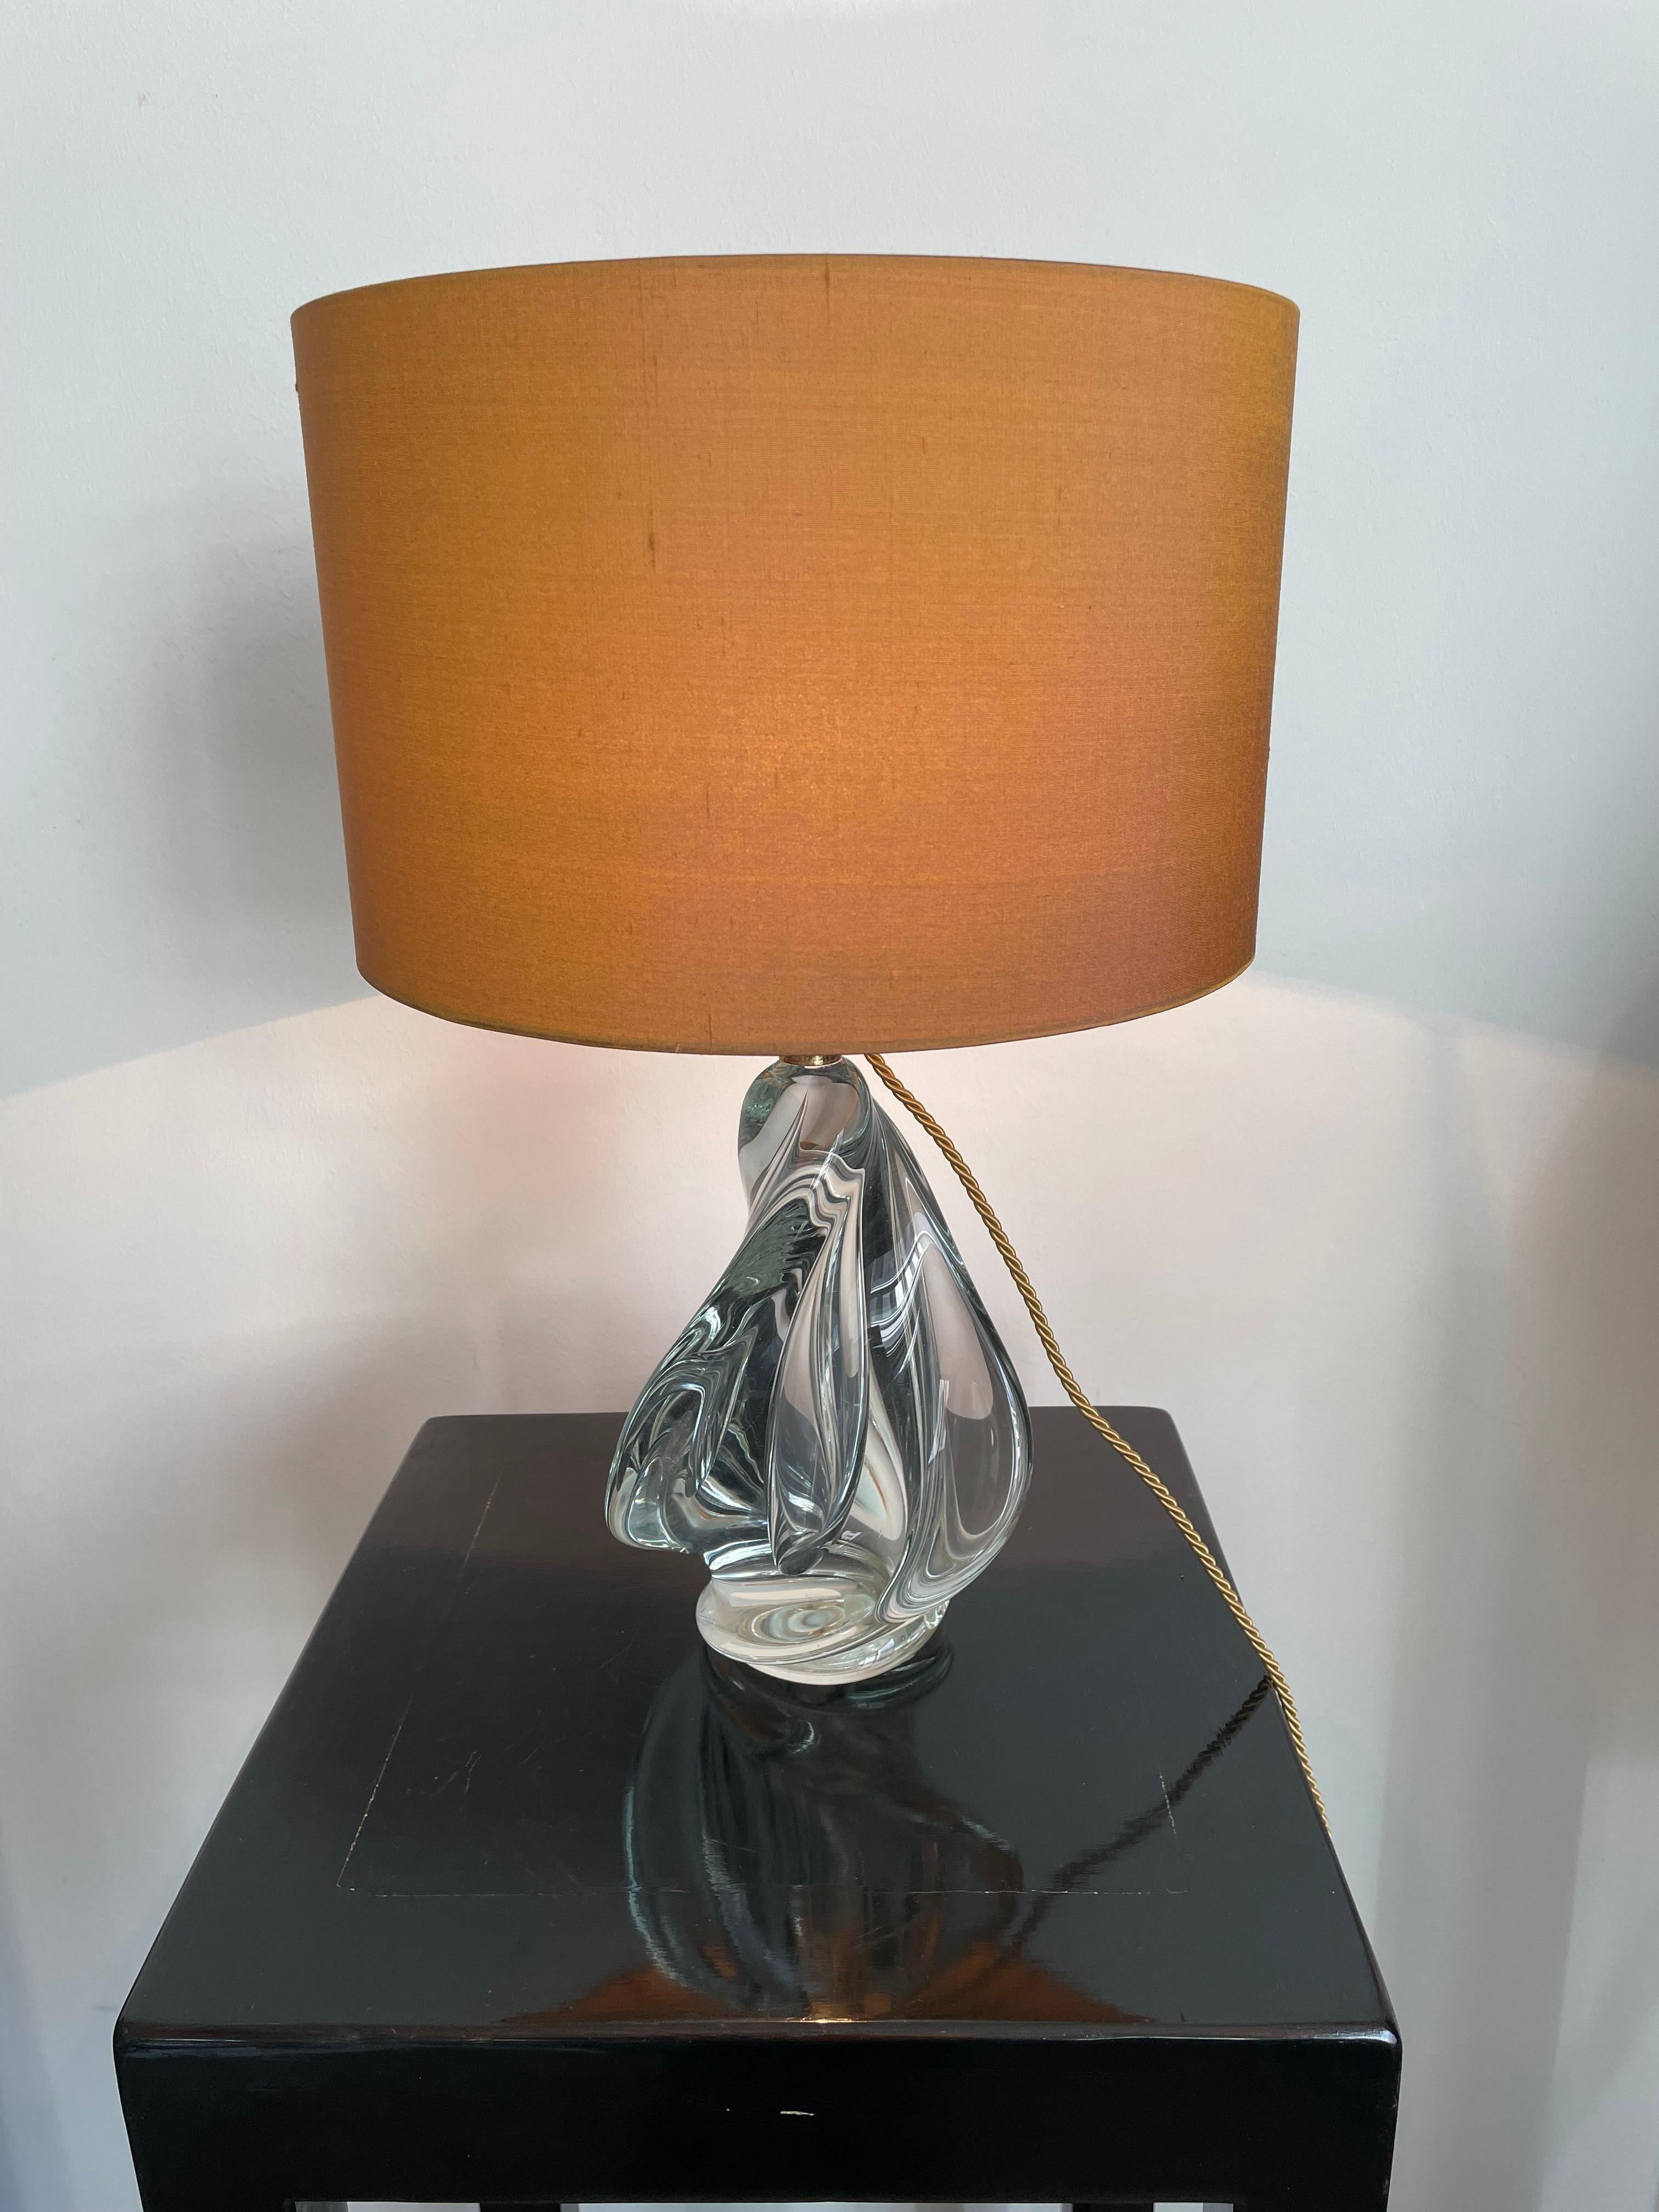 This beautiful Table Light Has A twisted Base In White Crystal From Val Saint Lambert / Vintage 1950 - VERY RARE LAMP BASE 

The Base is about 33cm H including  Bulb Socket And 17cm W 

The Lamp Shade  (31cm DIA x 20cm H)  Is Hand Crafted With Hand